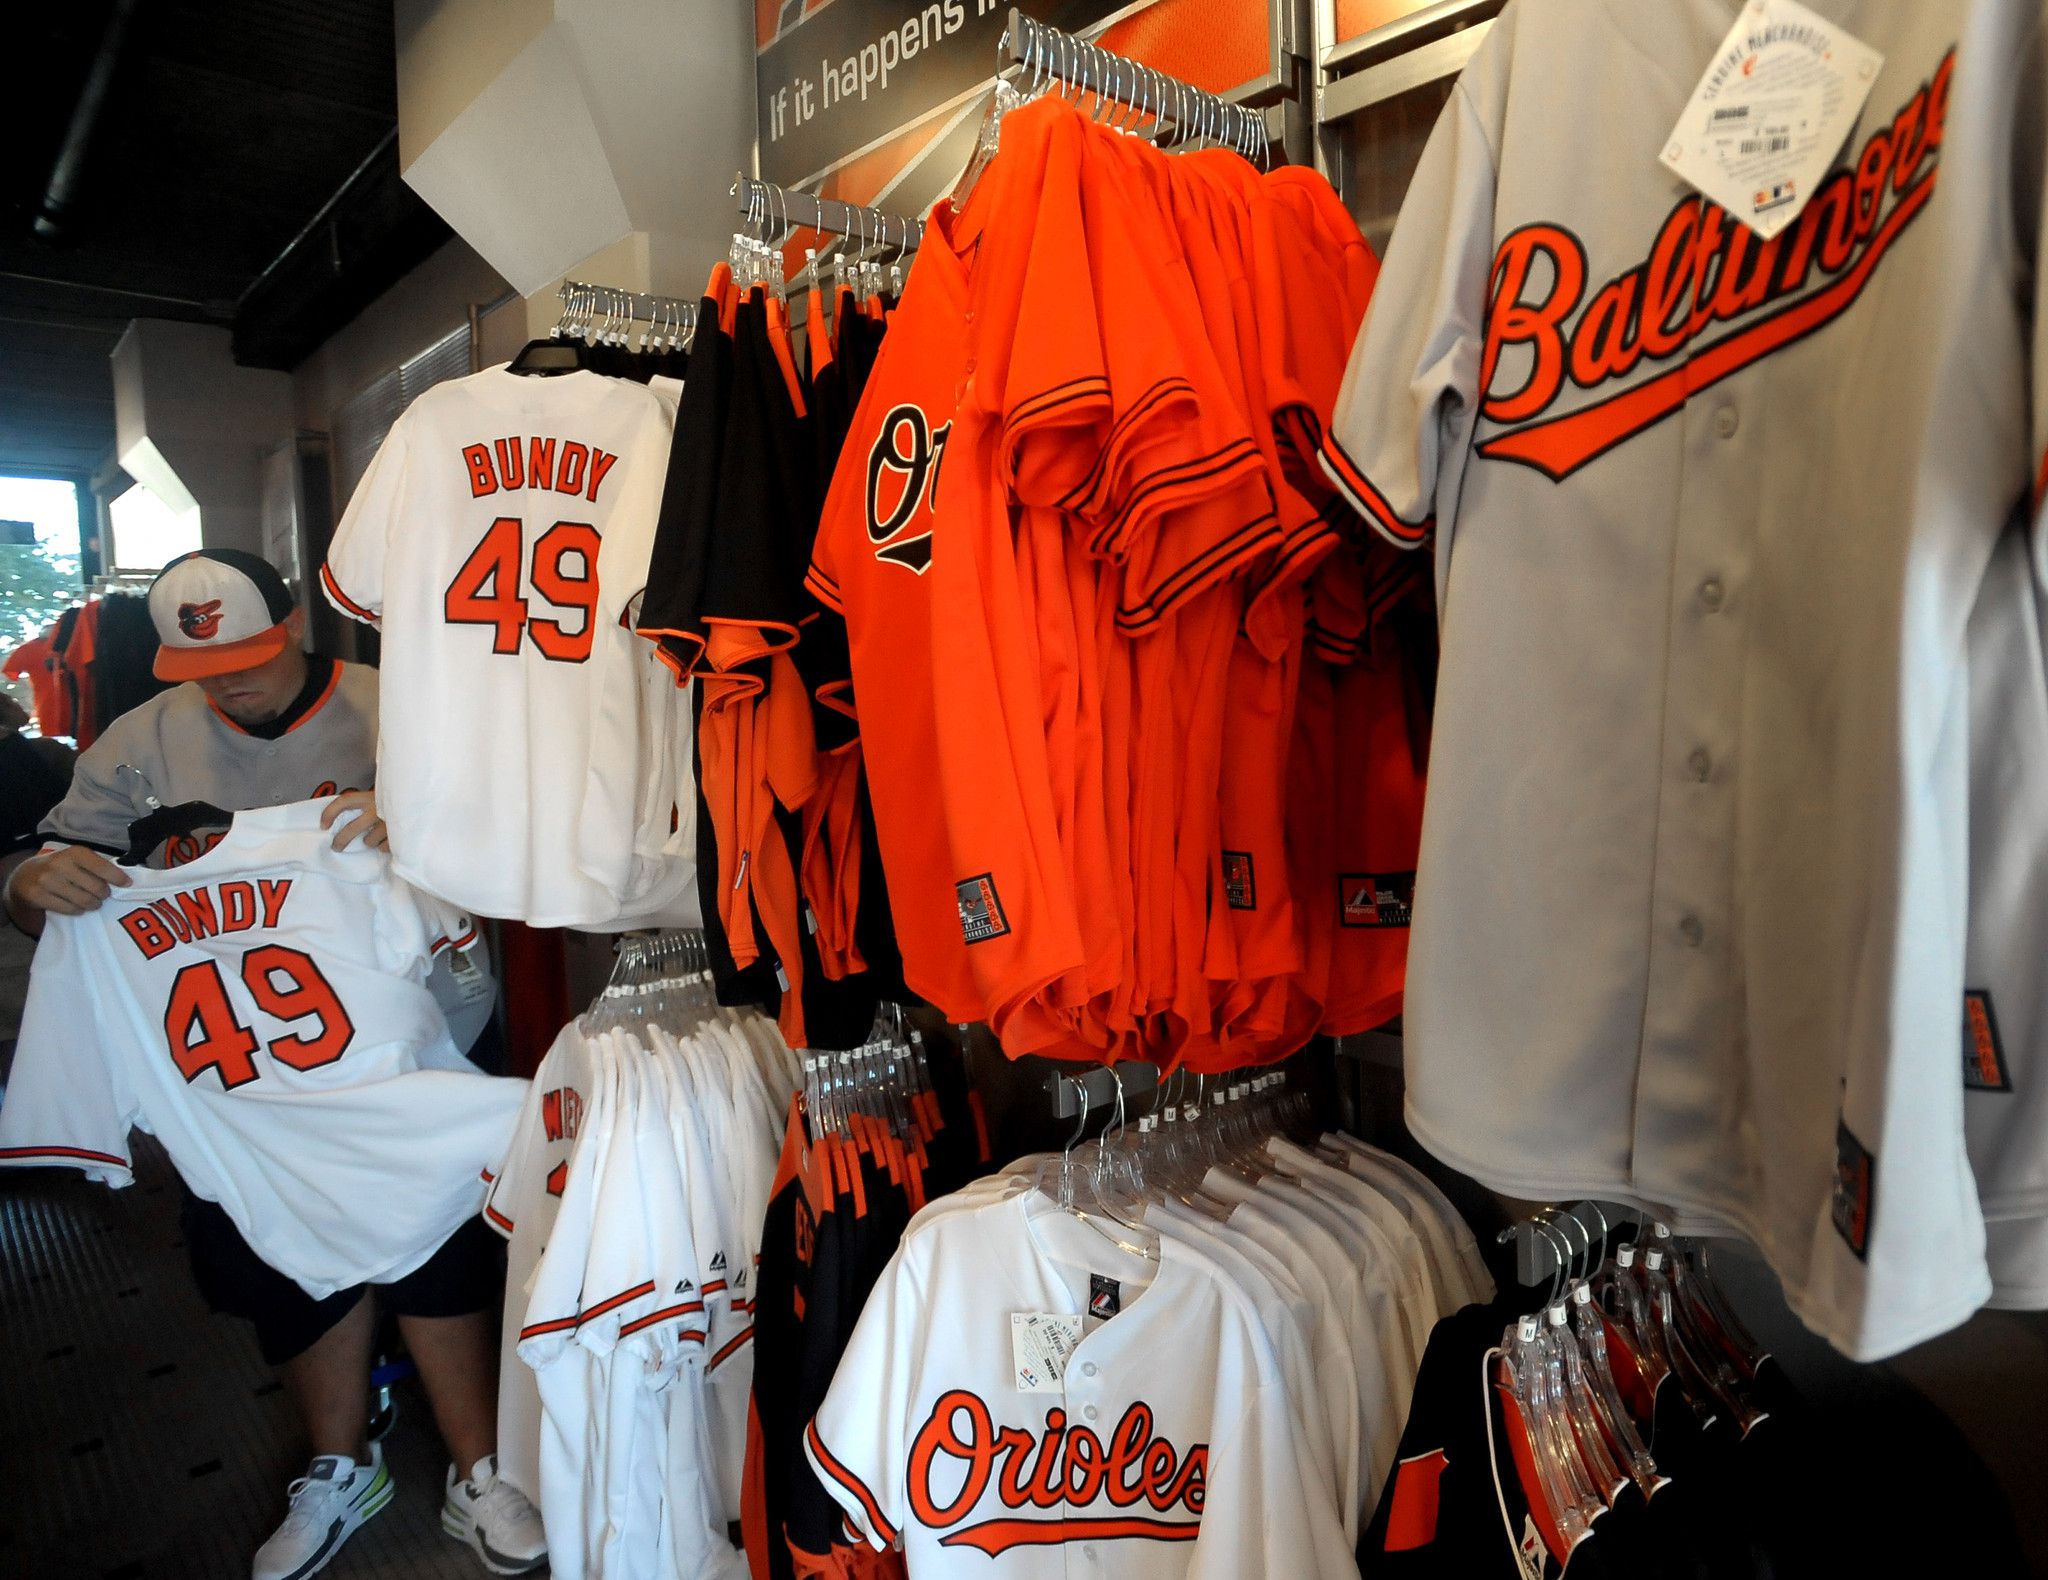 Orioles merchandise is a hit [Pictures]